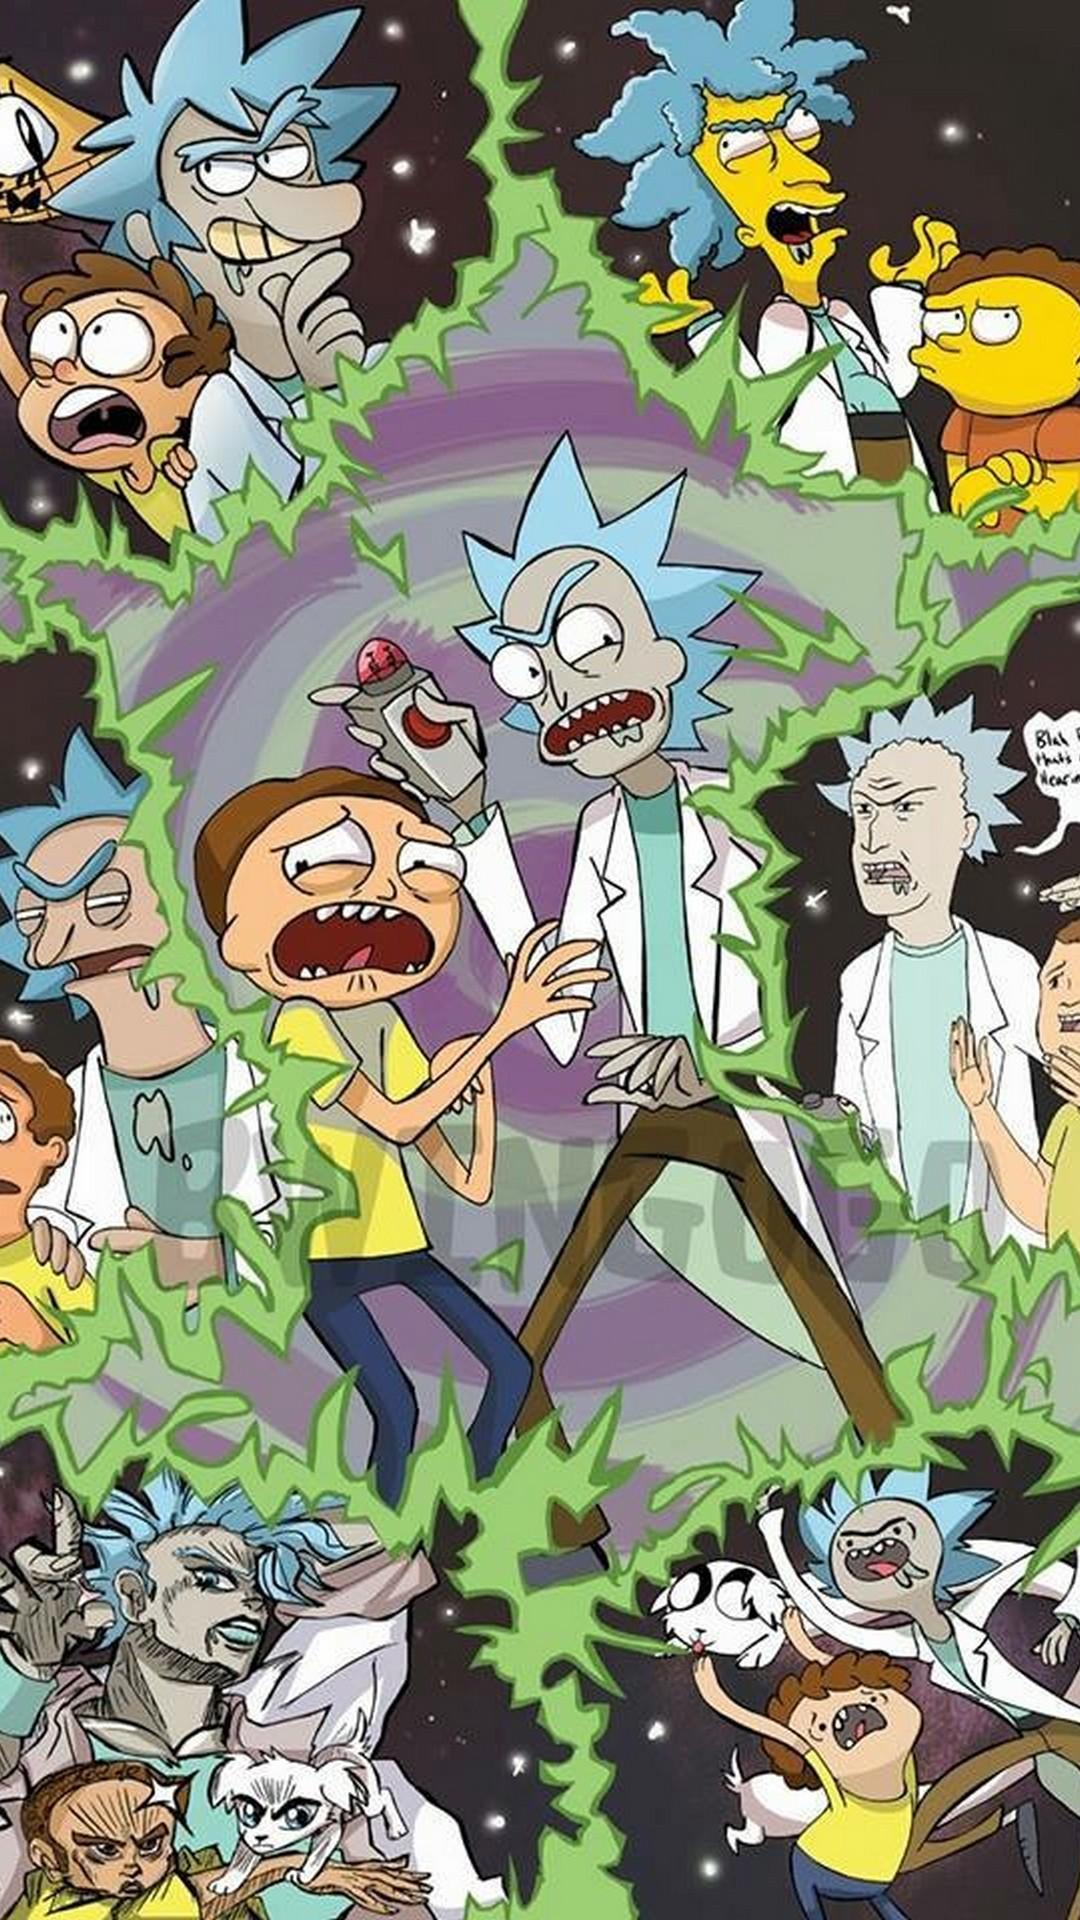 Rick and Morty x Supreme Wallpaper iPhone  Cartoon wallpaper, Supreme  wallpaper, Iphone wallpaper rick and morty